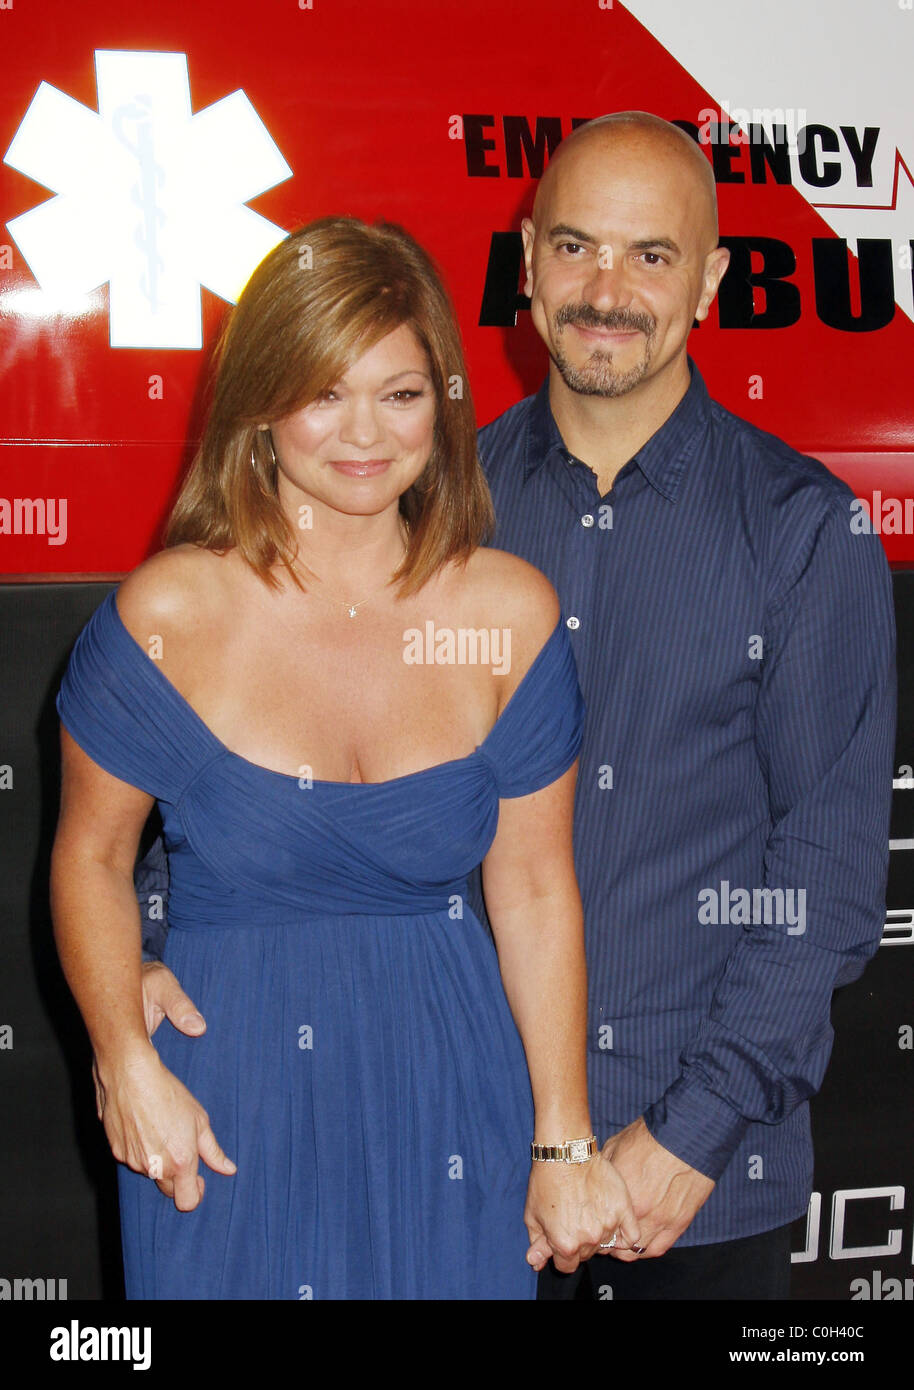 Valerie Bertinelli 'Hancock' Los Angeles Premiere - Arrivals held at the Grauman's Chinese Theatre Hollywood, California USA - Stock Photo